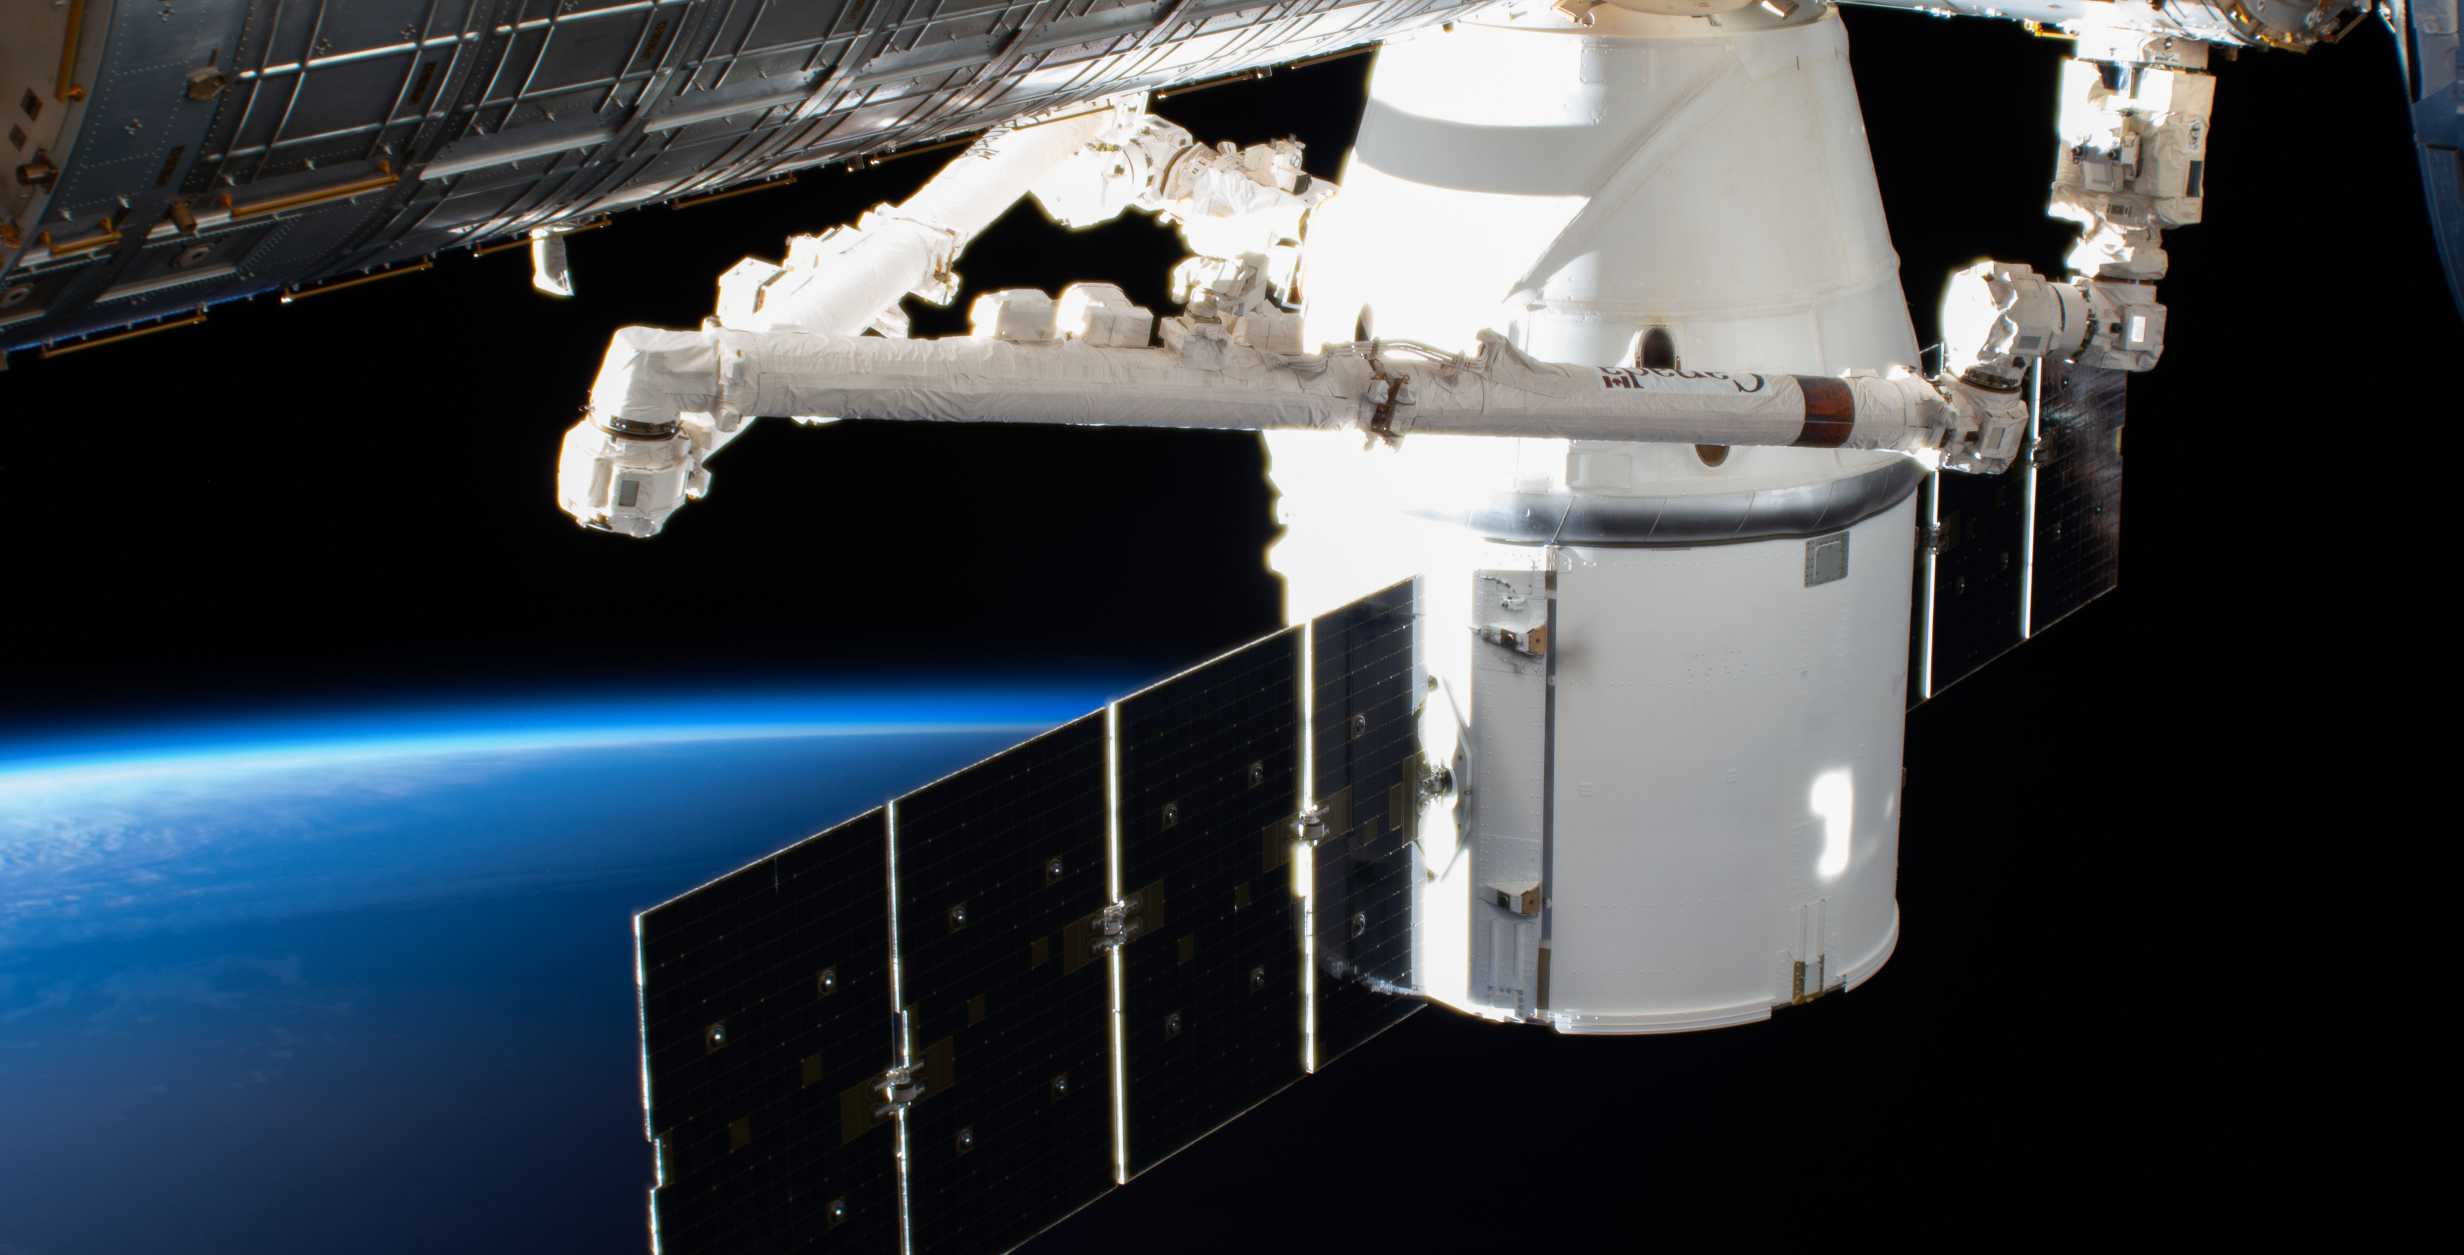 CRS-20 Cargo Dragon C112 ISS arrival 030920 (NASA) 5 crop (c)